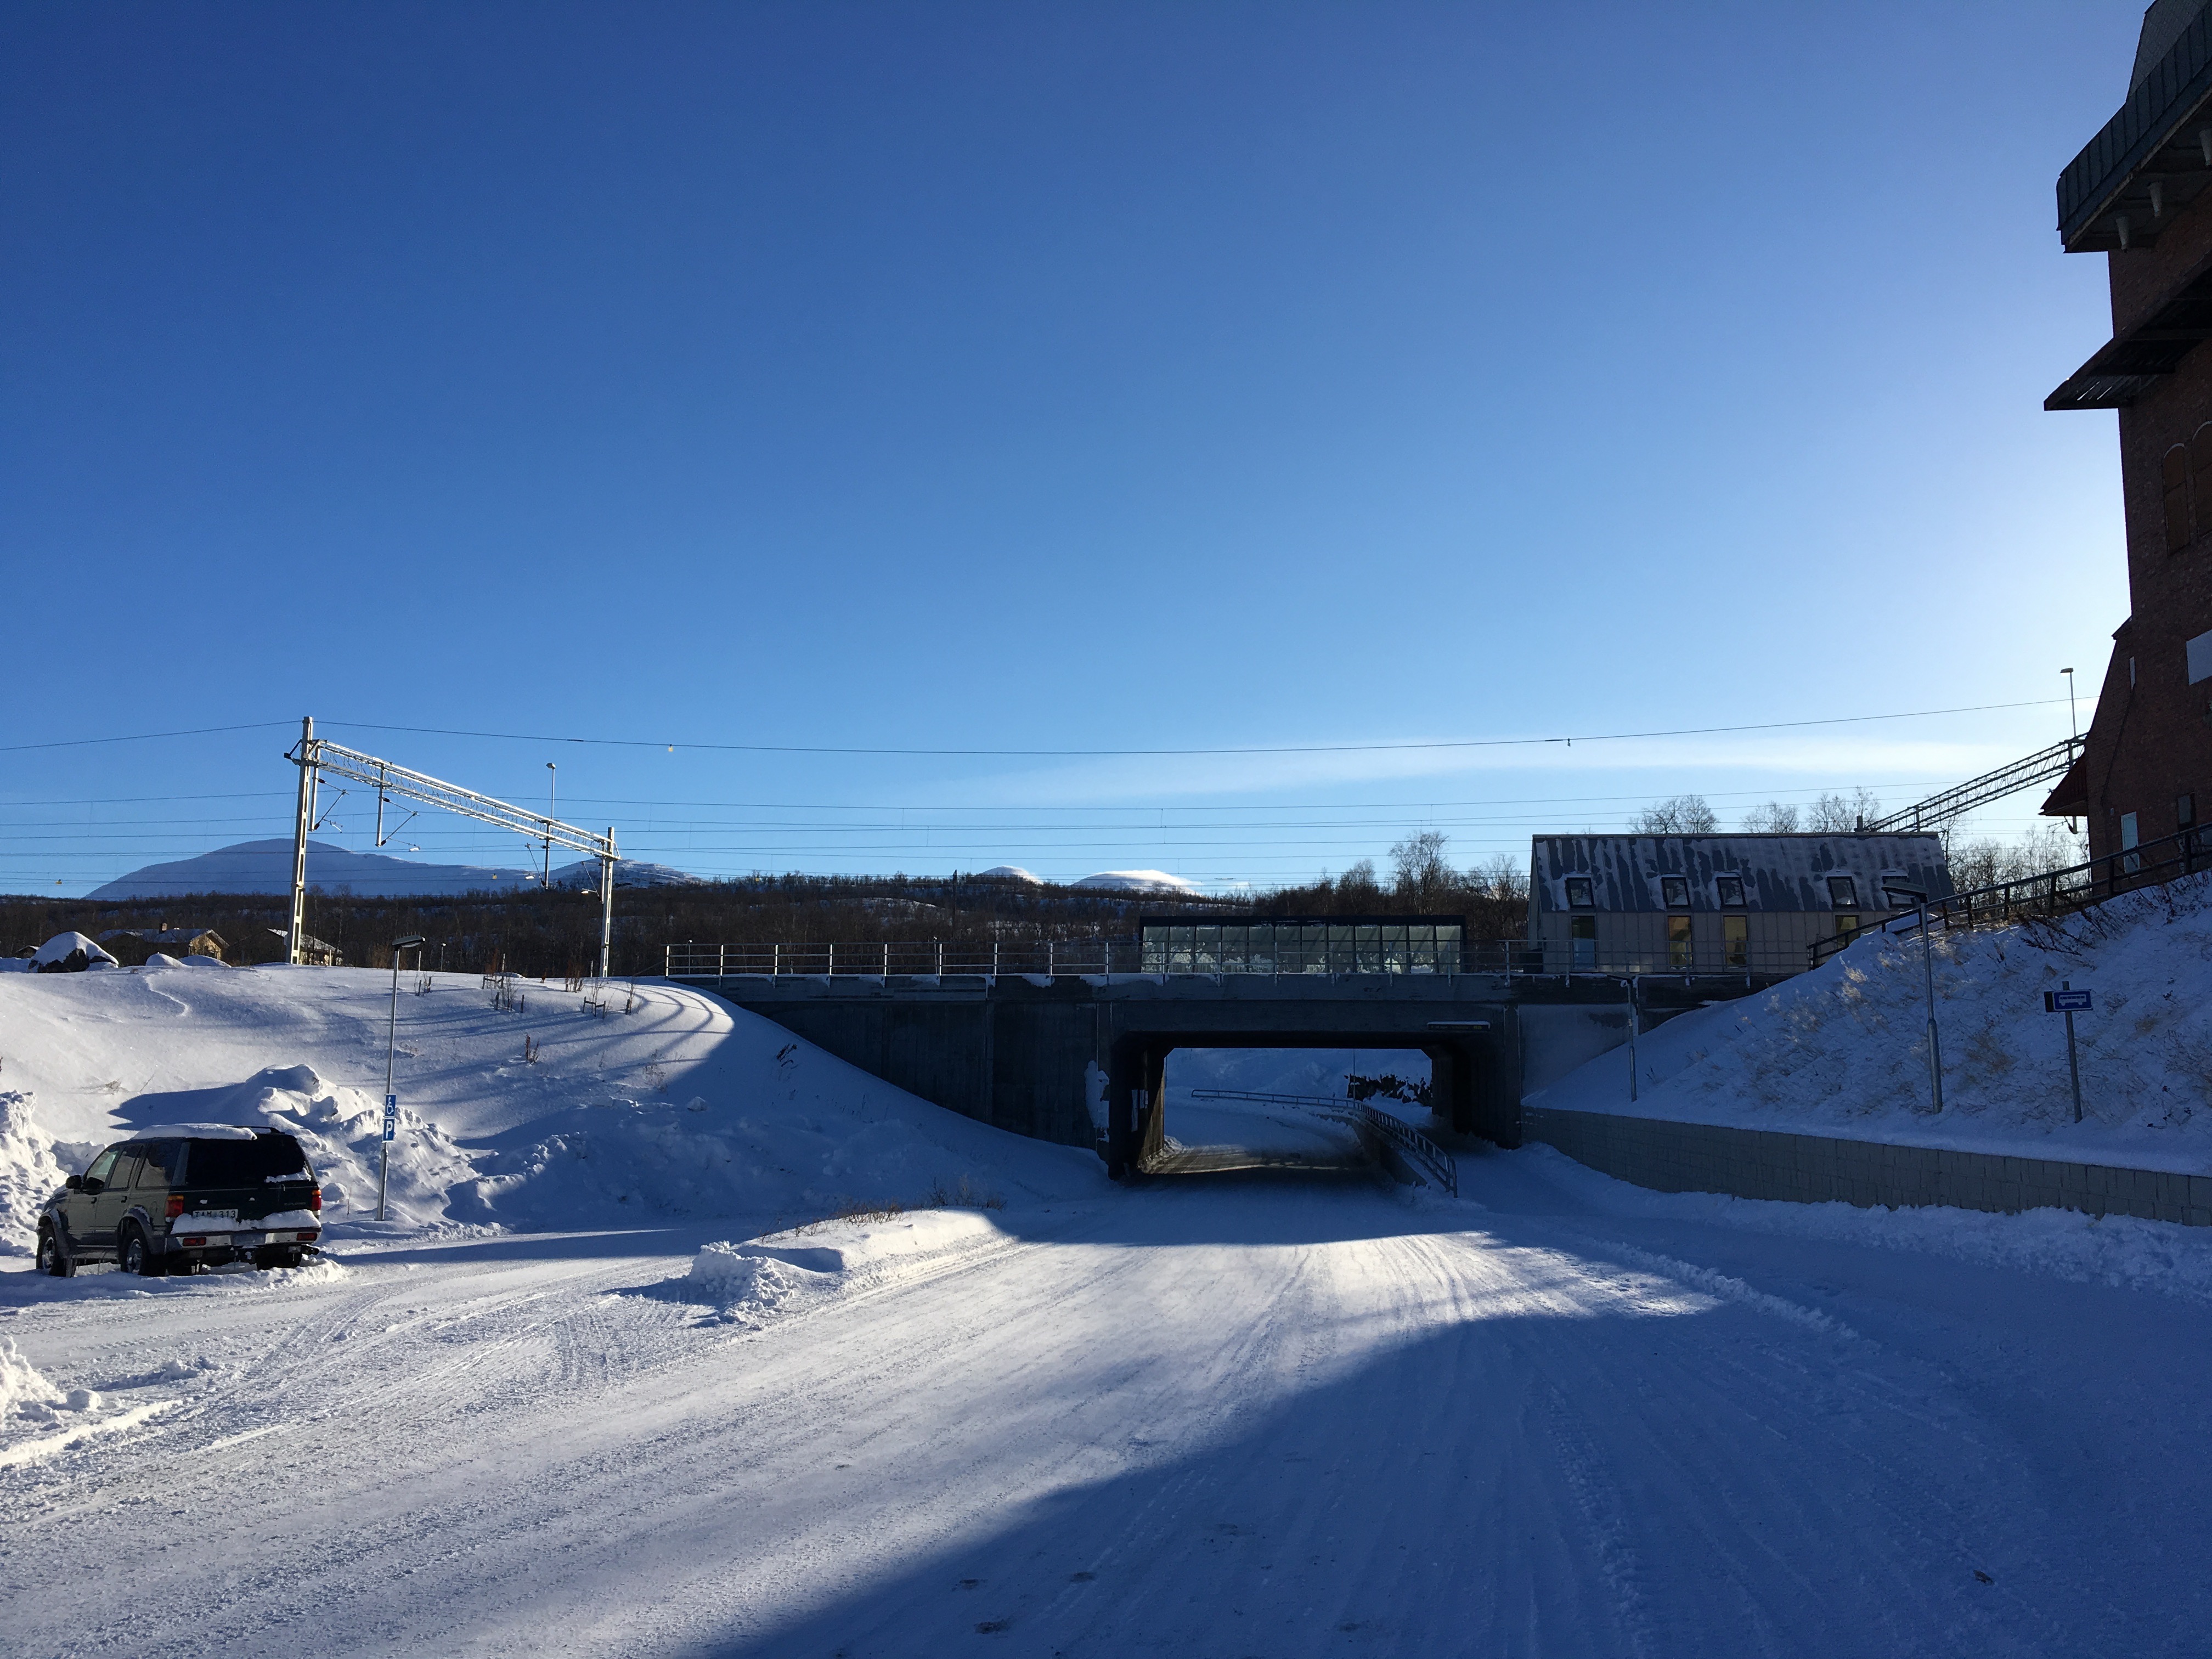 Walk under the train station and up the hill to get to Abisko.net hostel.